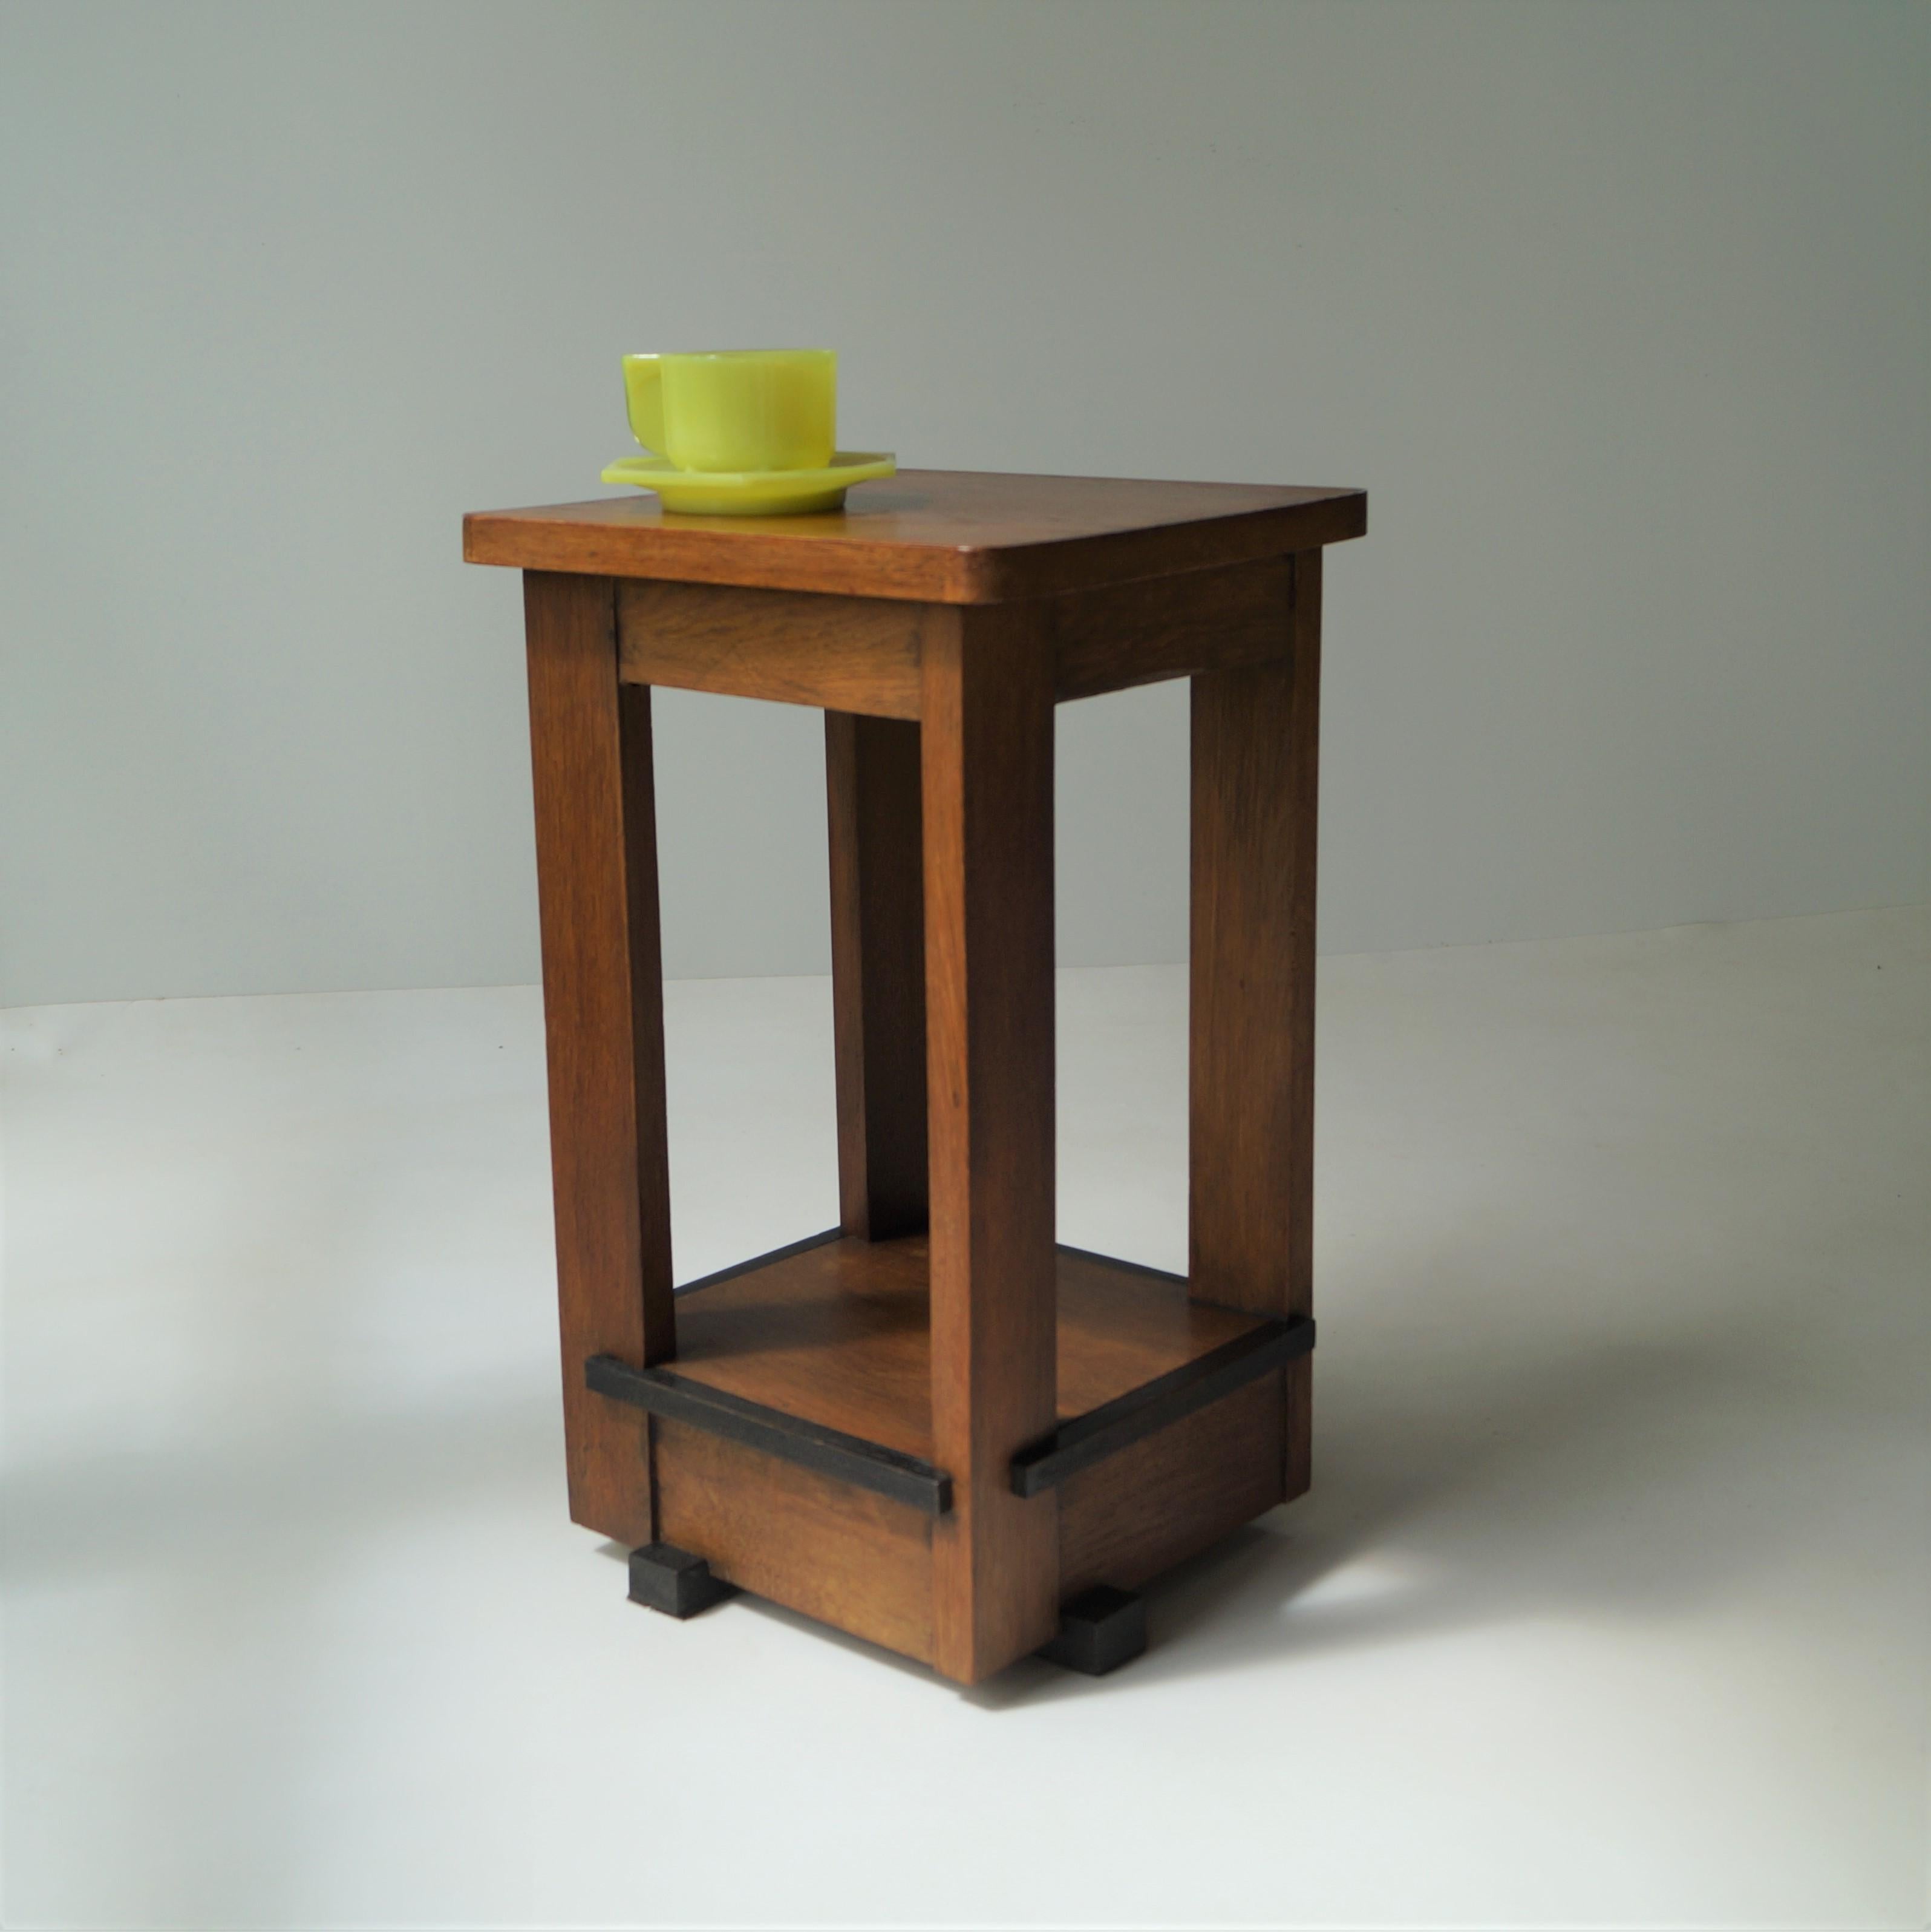 Dutch Art Deco Haagse School side table attributed to Jan Brunott, 1920s For Sale 7